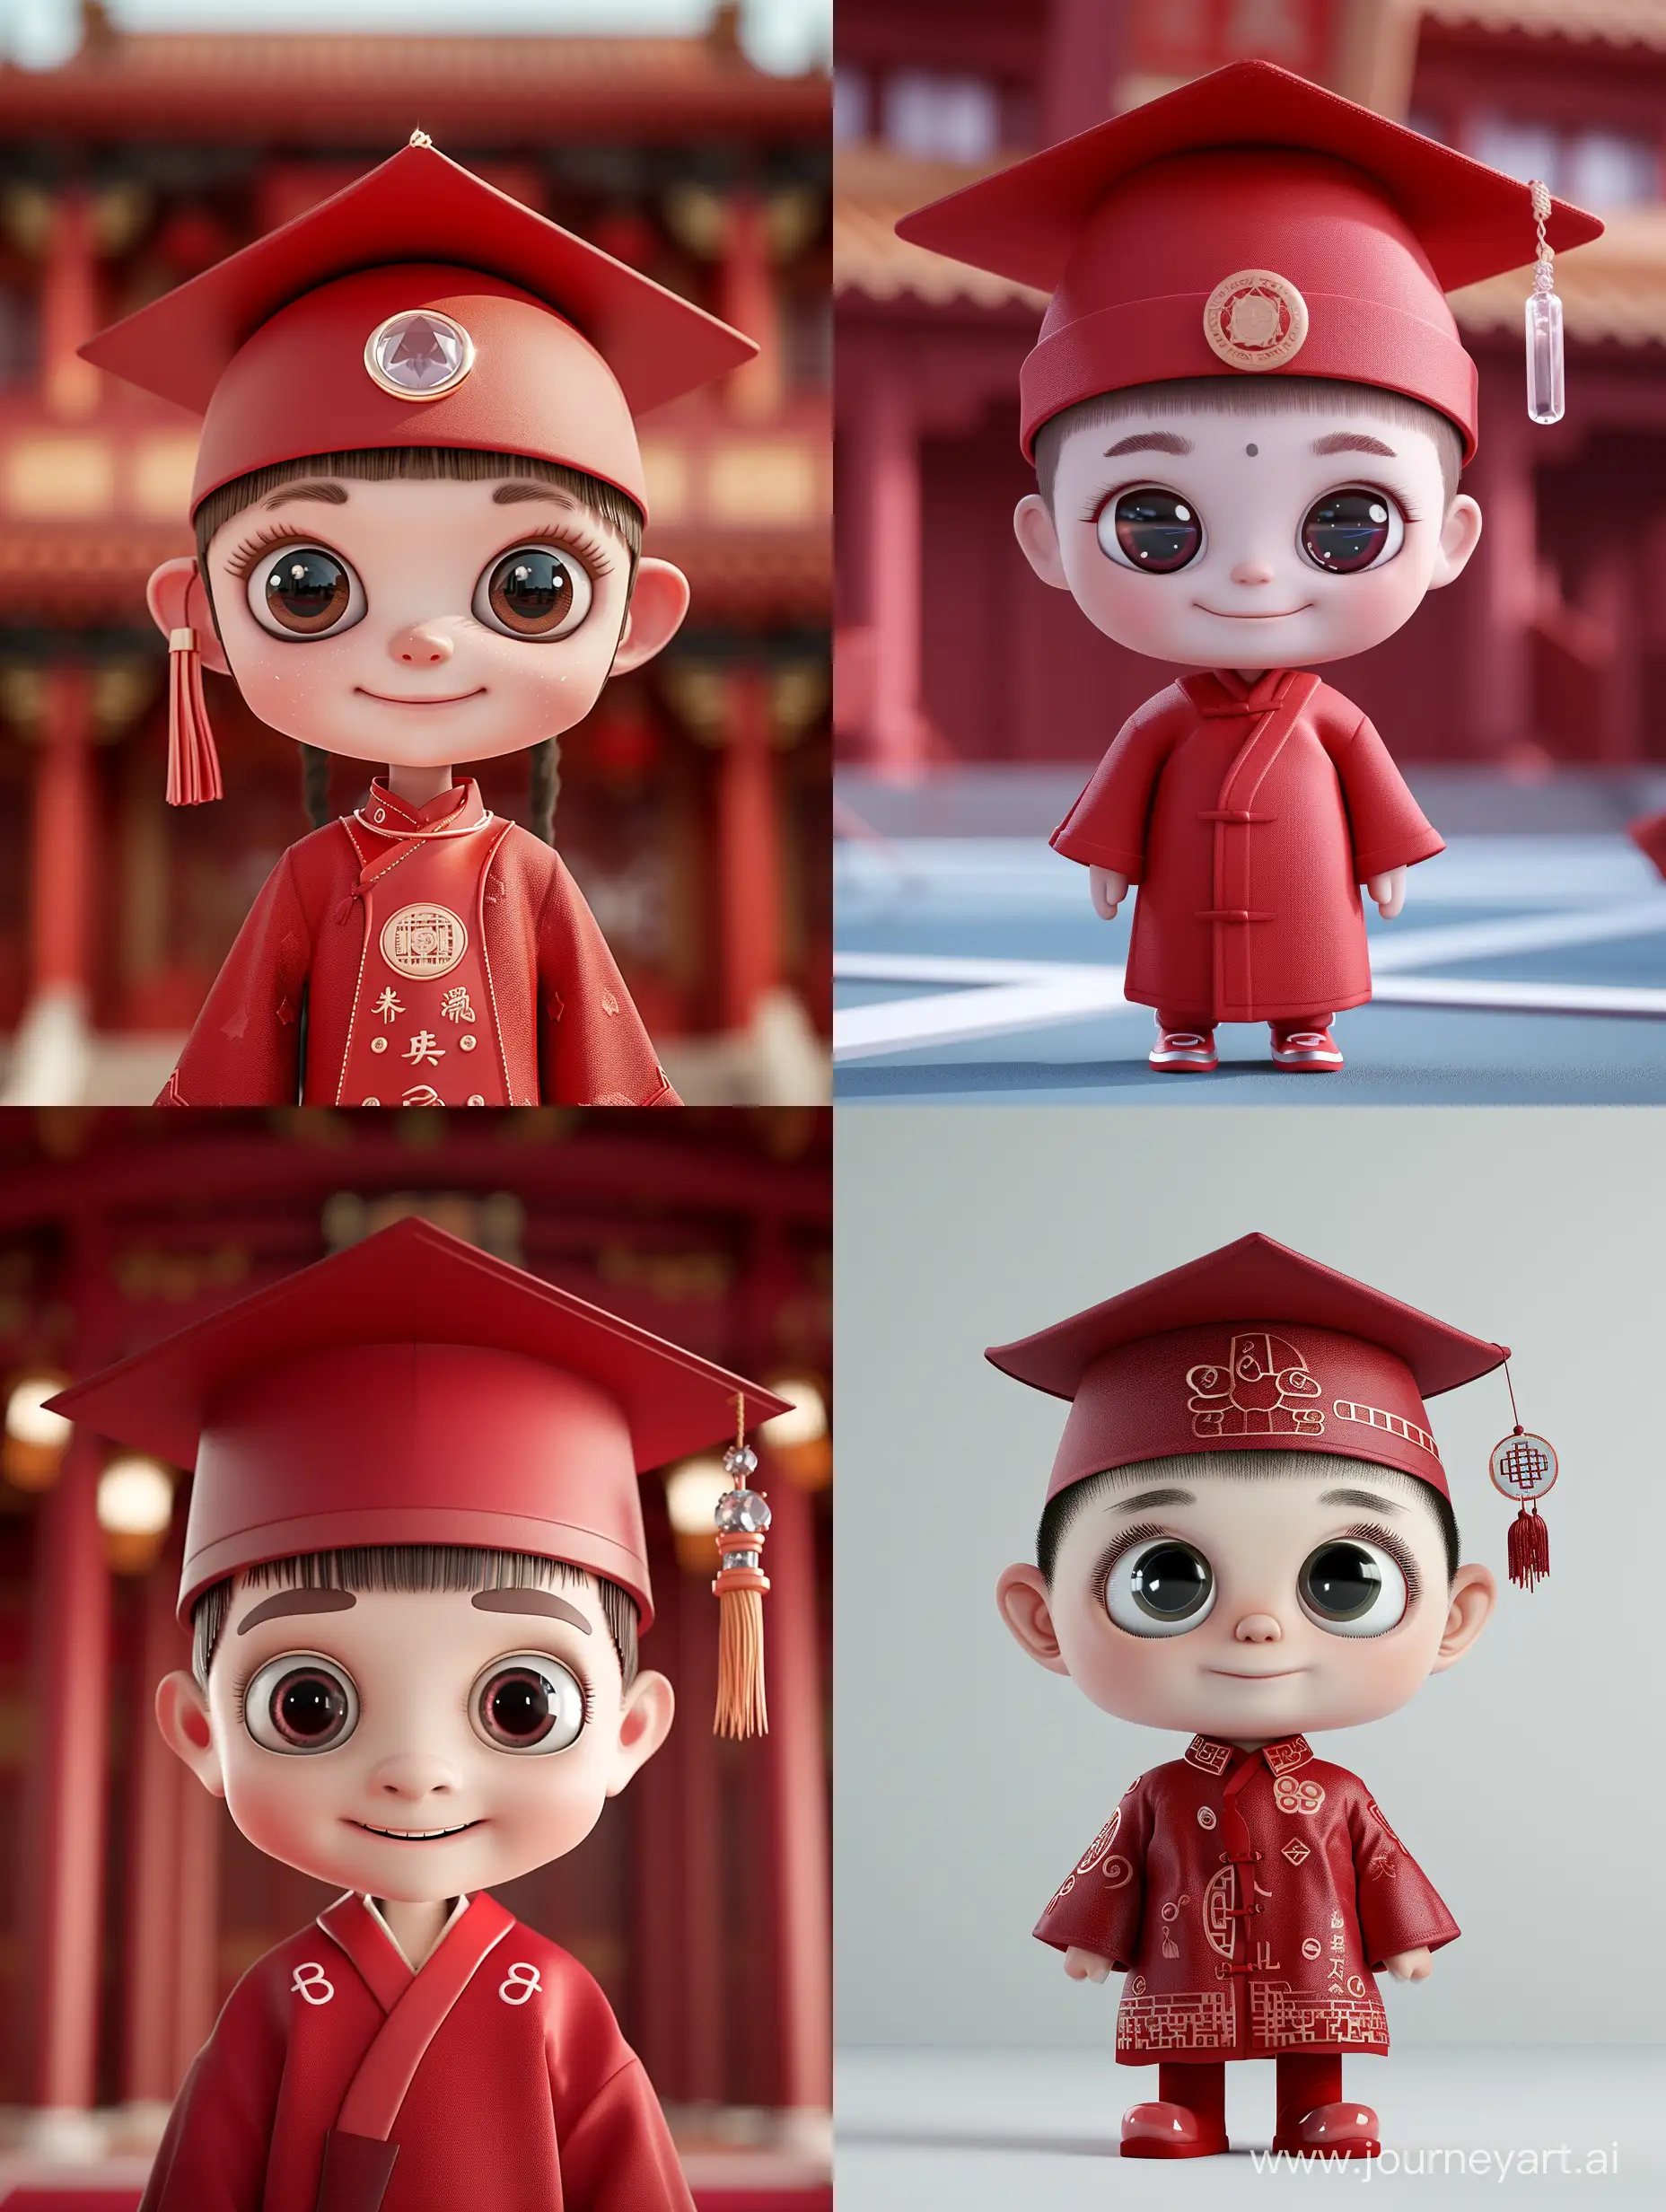 Adorable-Miniature-Doctoral-Character-in-Red-Academic-Attire